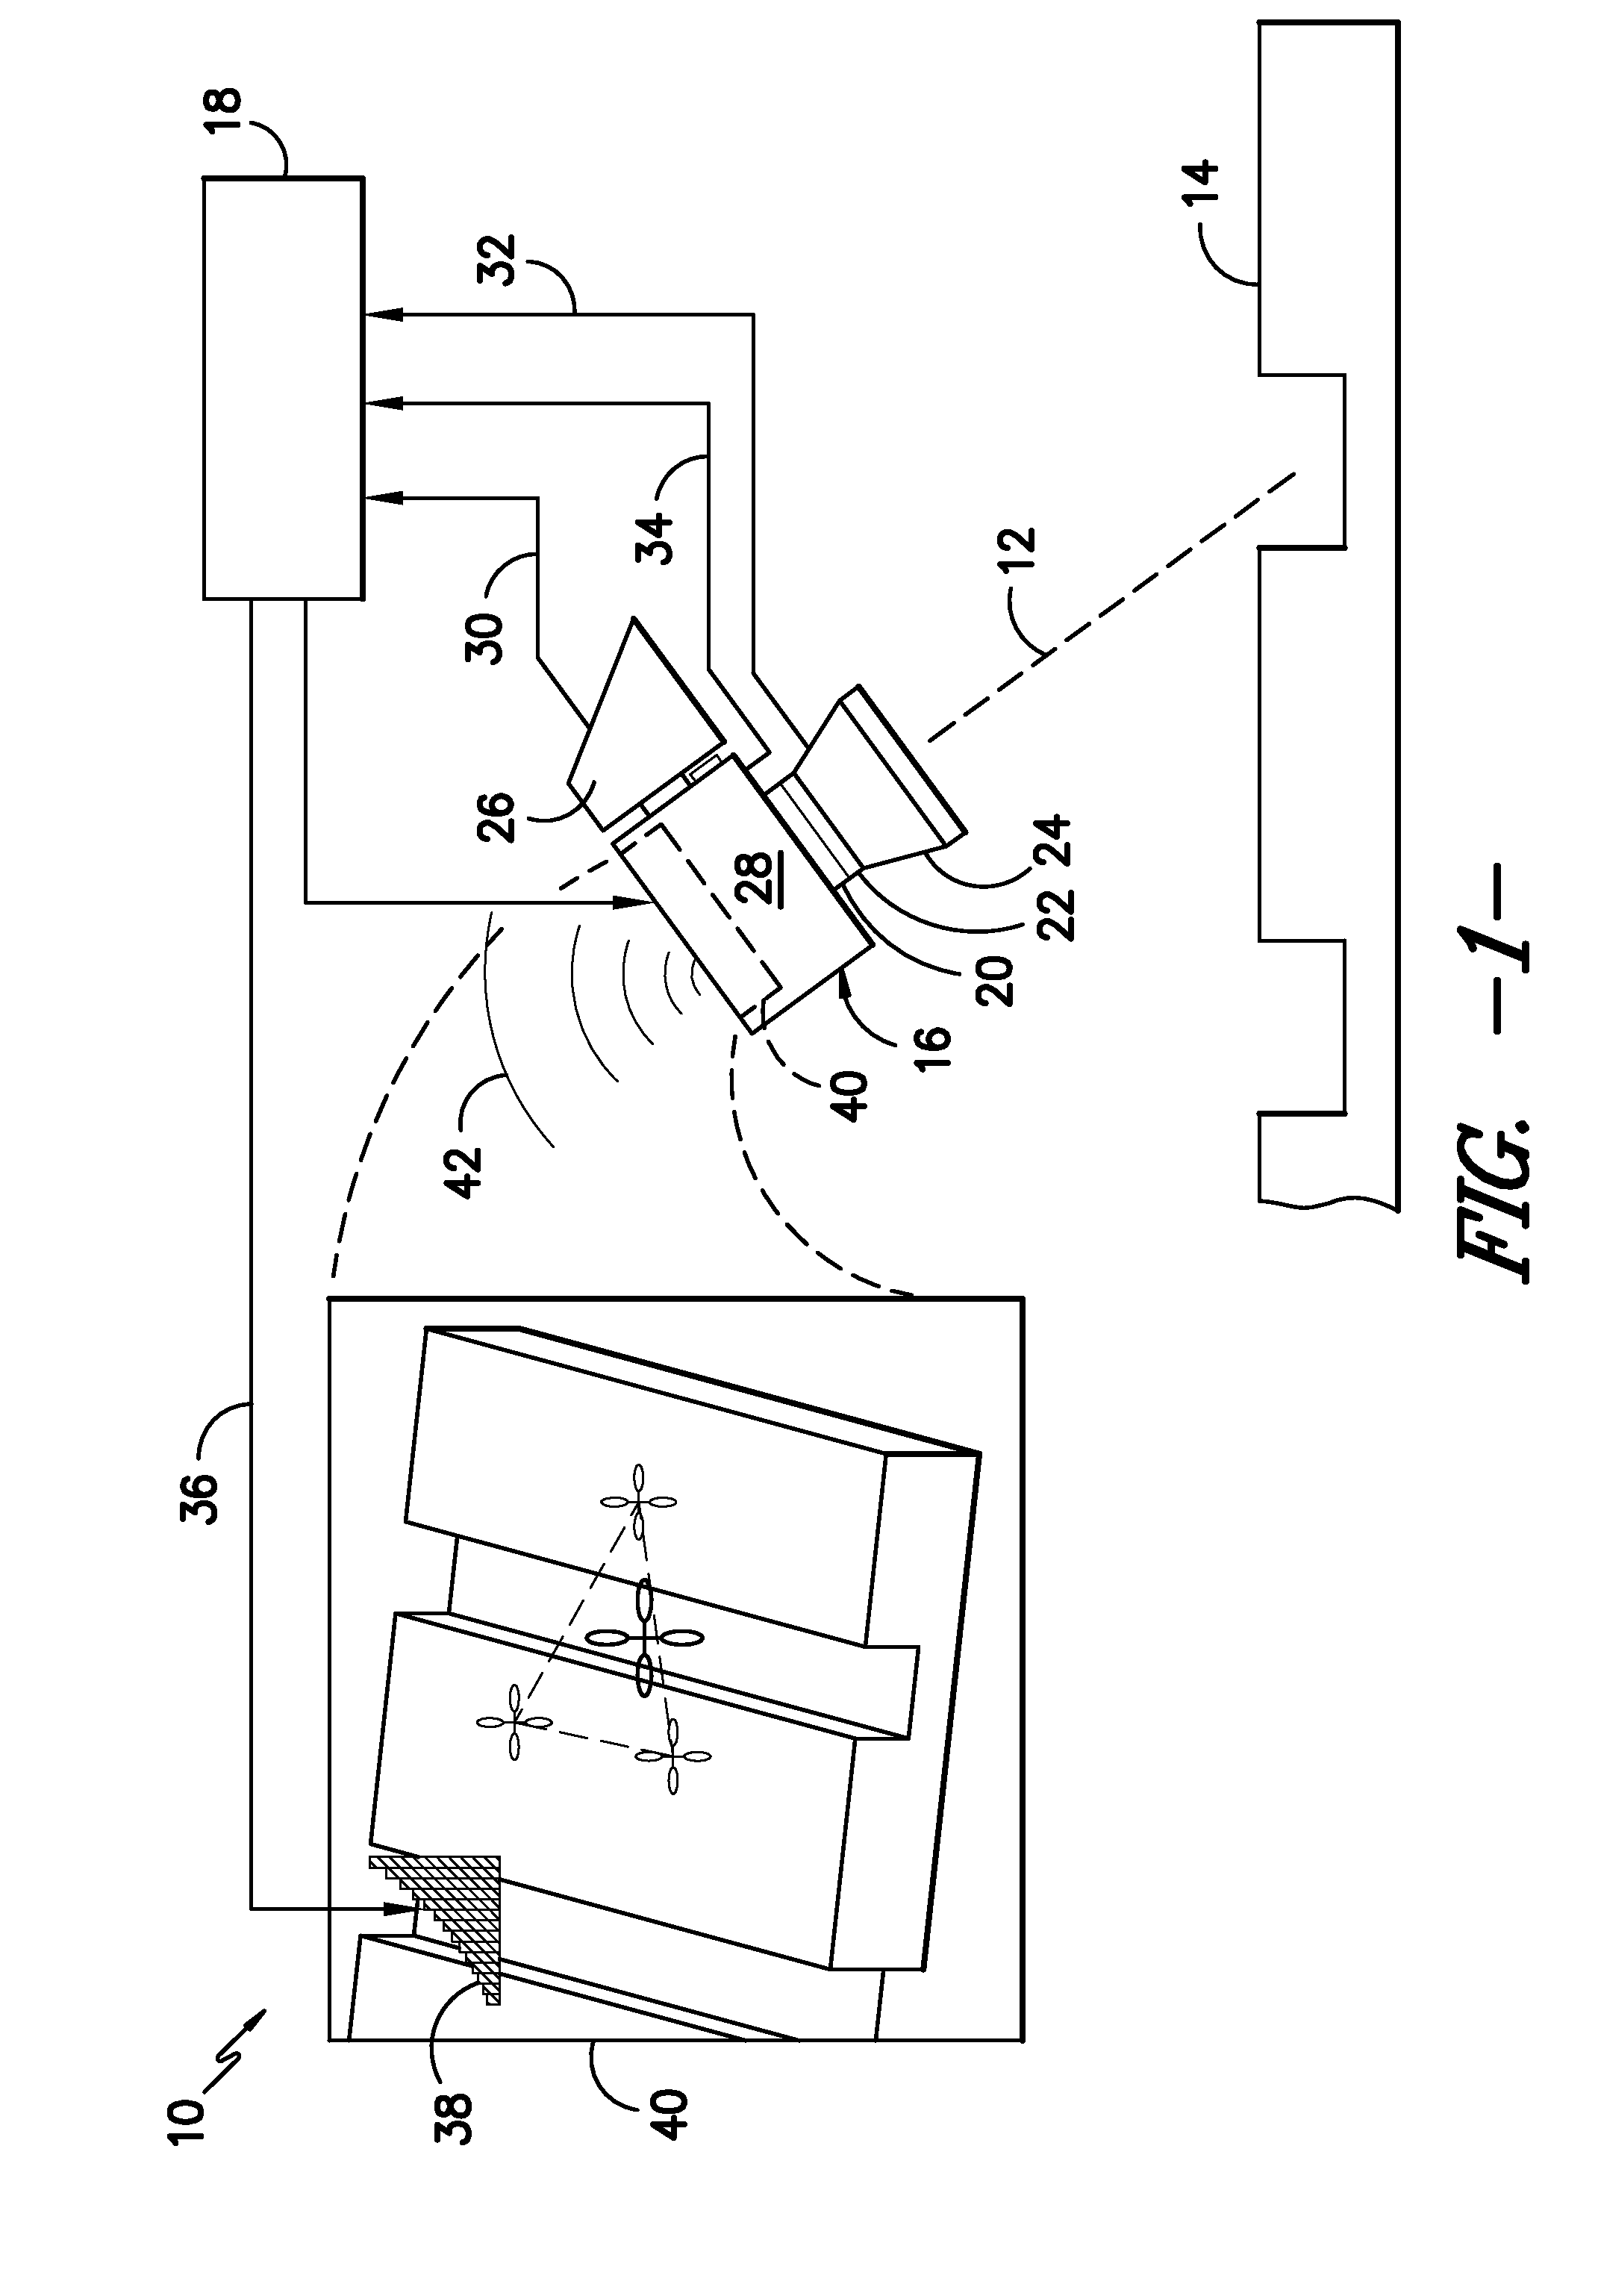 System and method for measuring a distance to an object